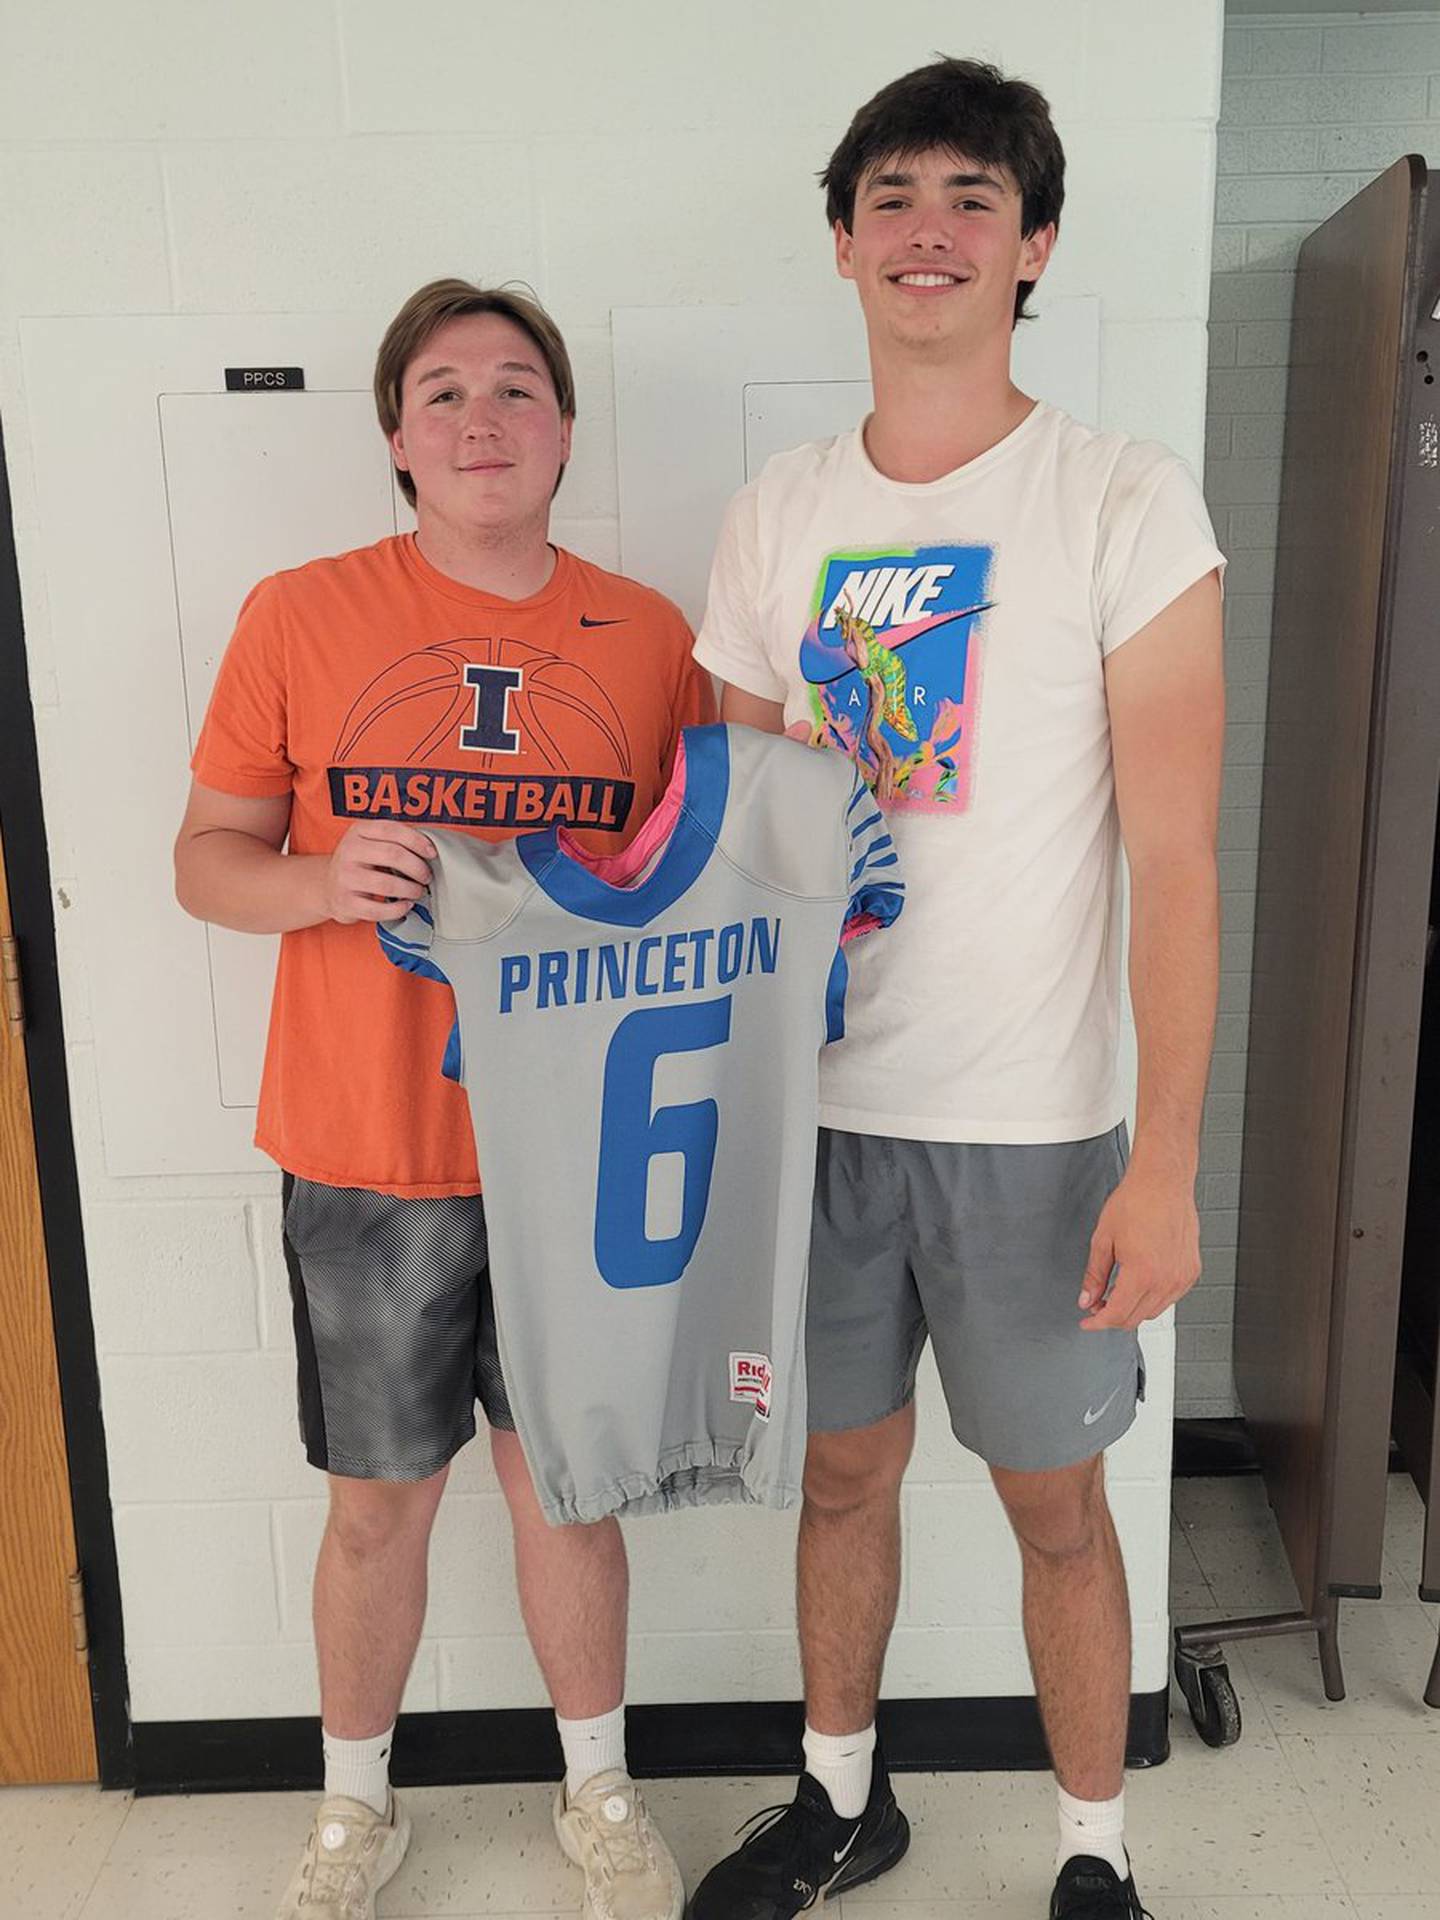 Captain Noah LaPorte (right) of "Noah's Ark" chose Jordan Reinhardt with his first pick in the Tigers' "NEL" Draft.